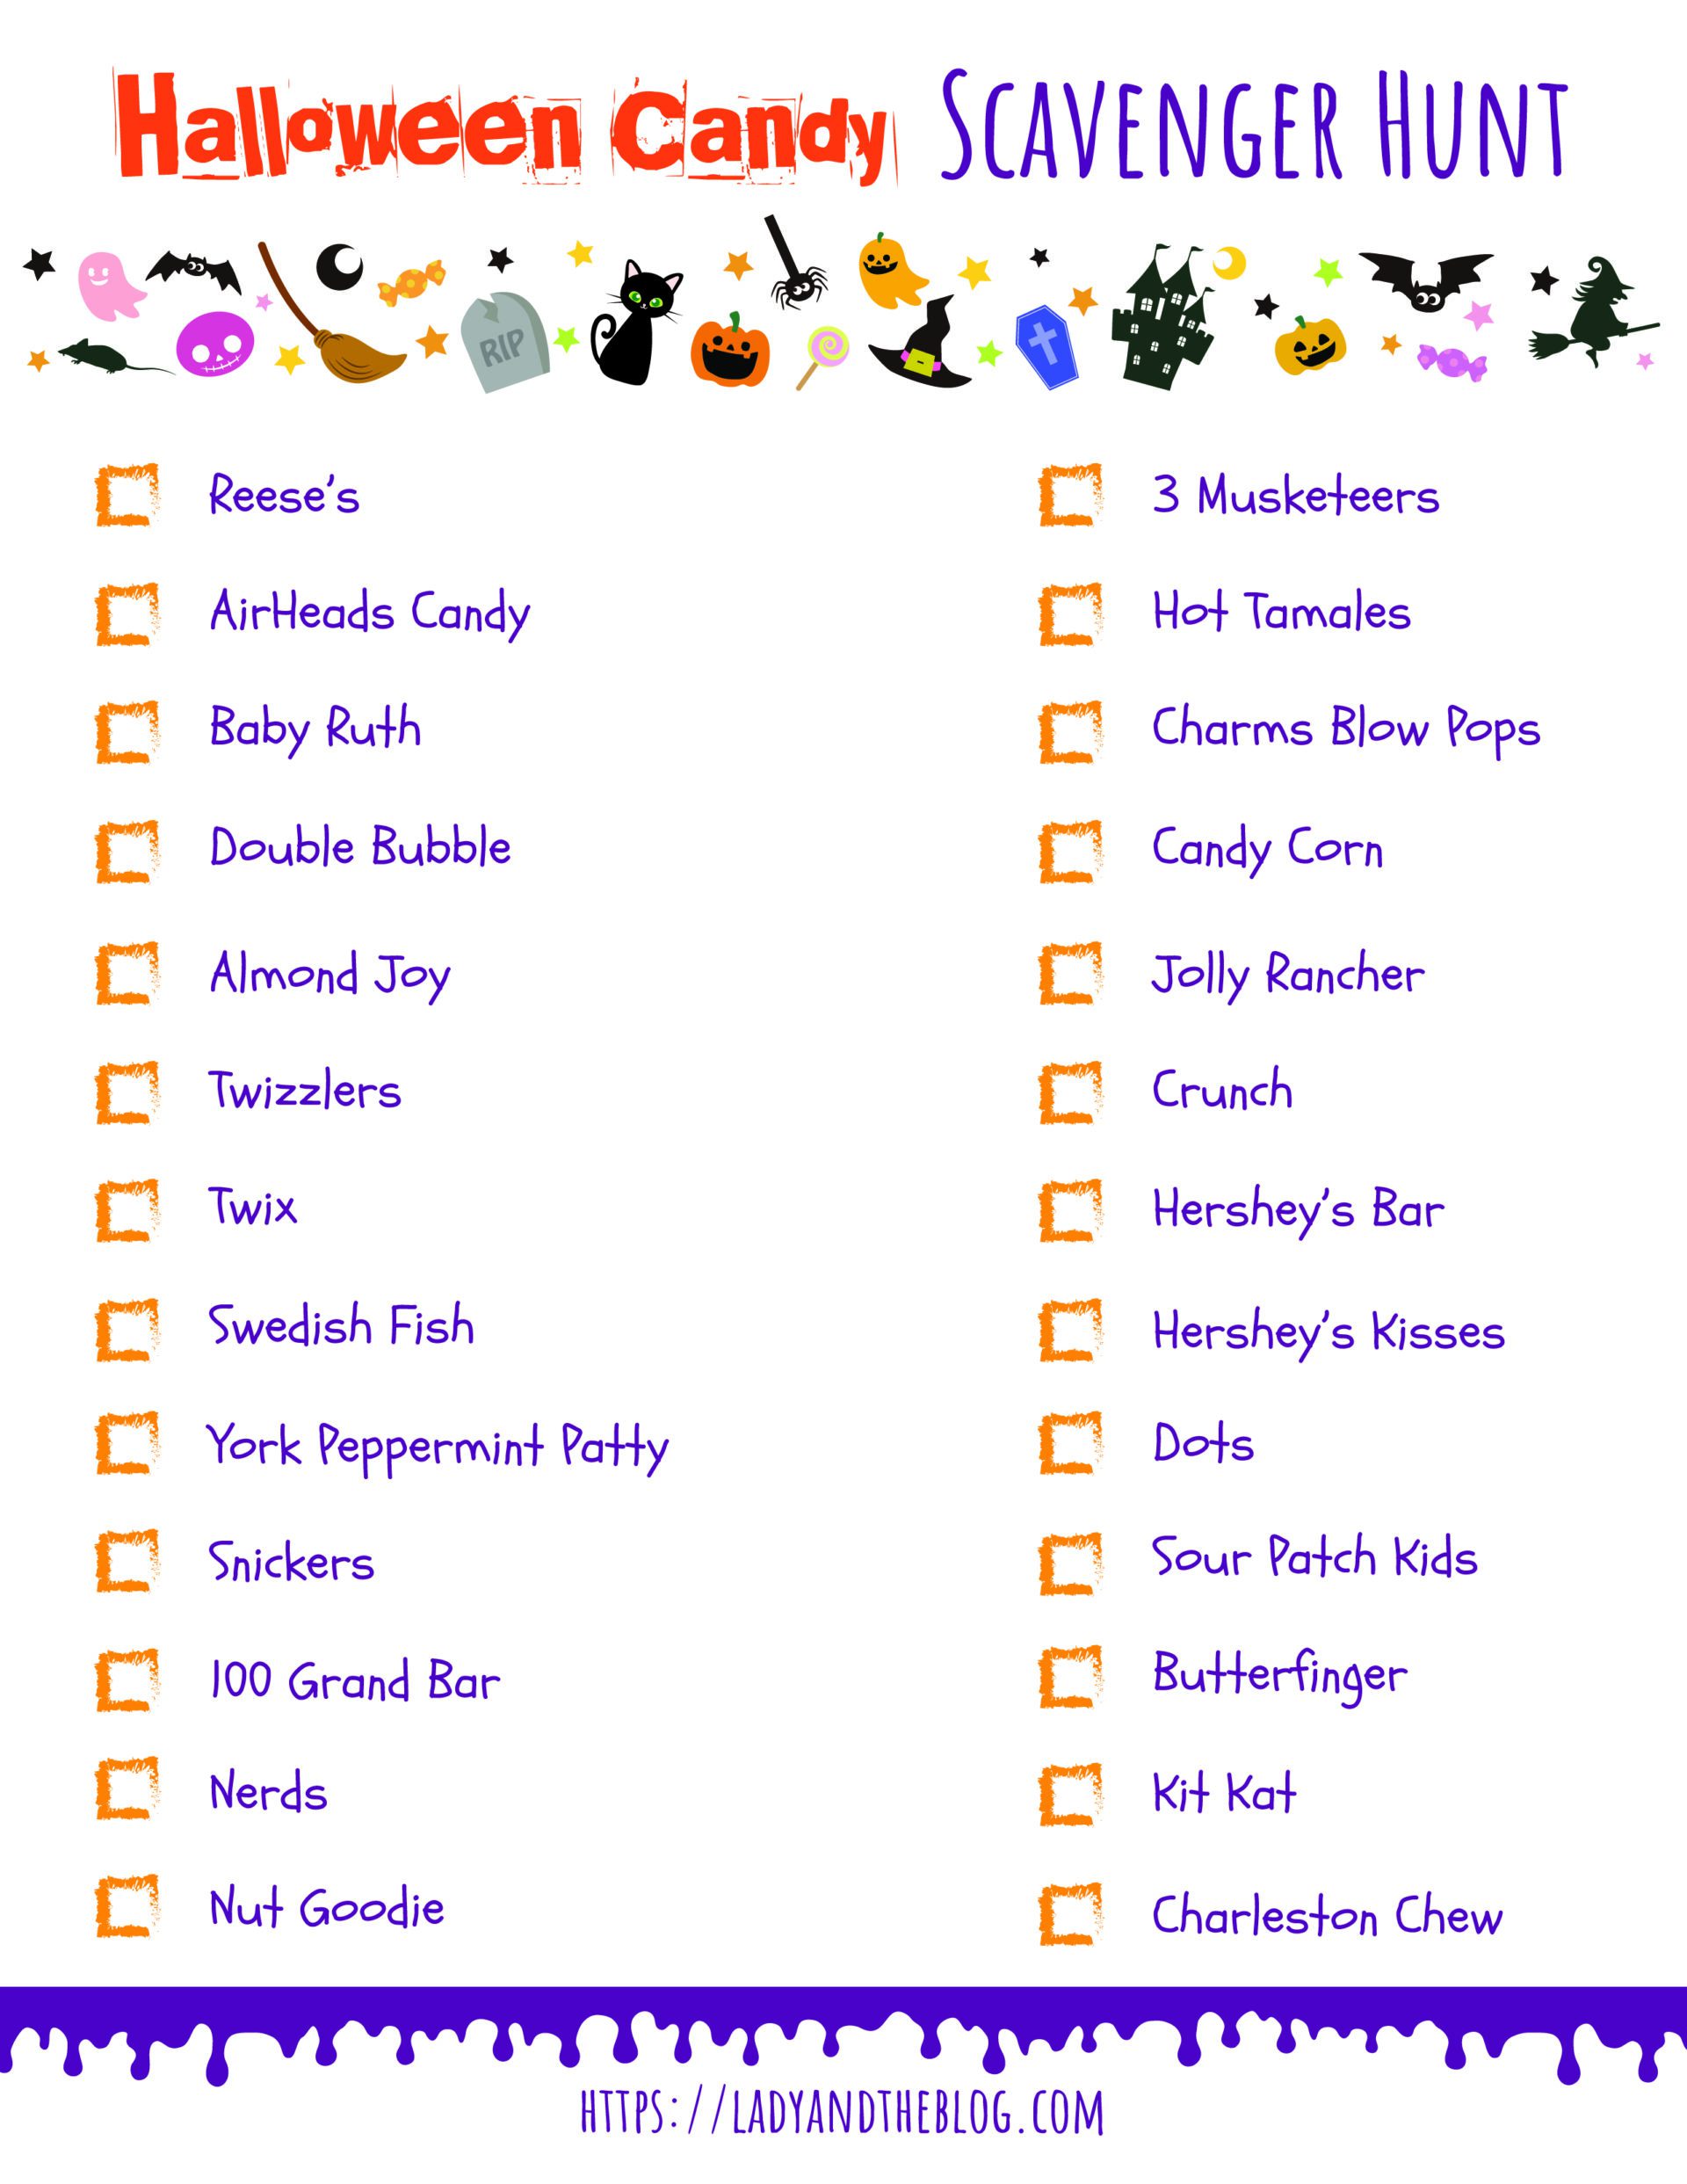 Halloween Scavenger Hunt Printable - Halloween Candy List - Lady and